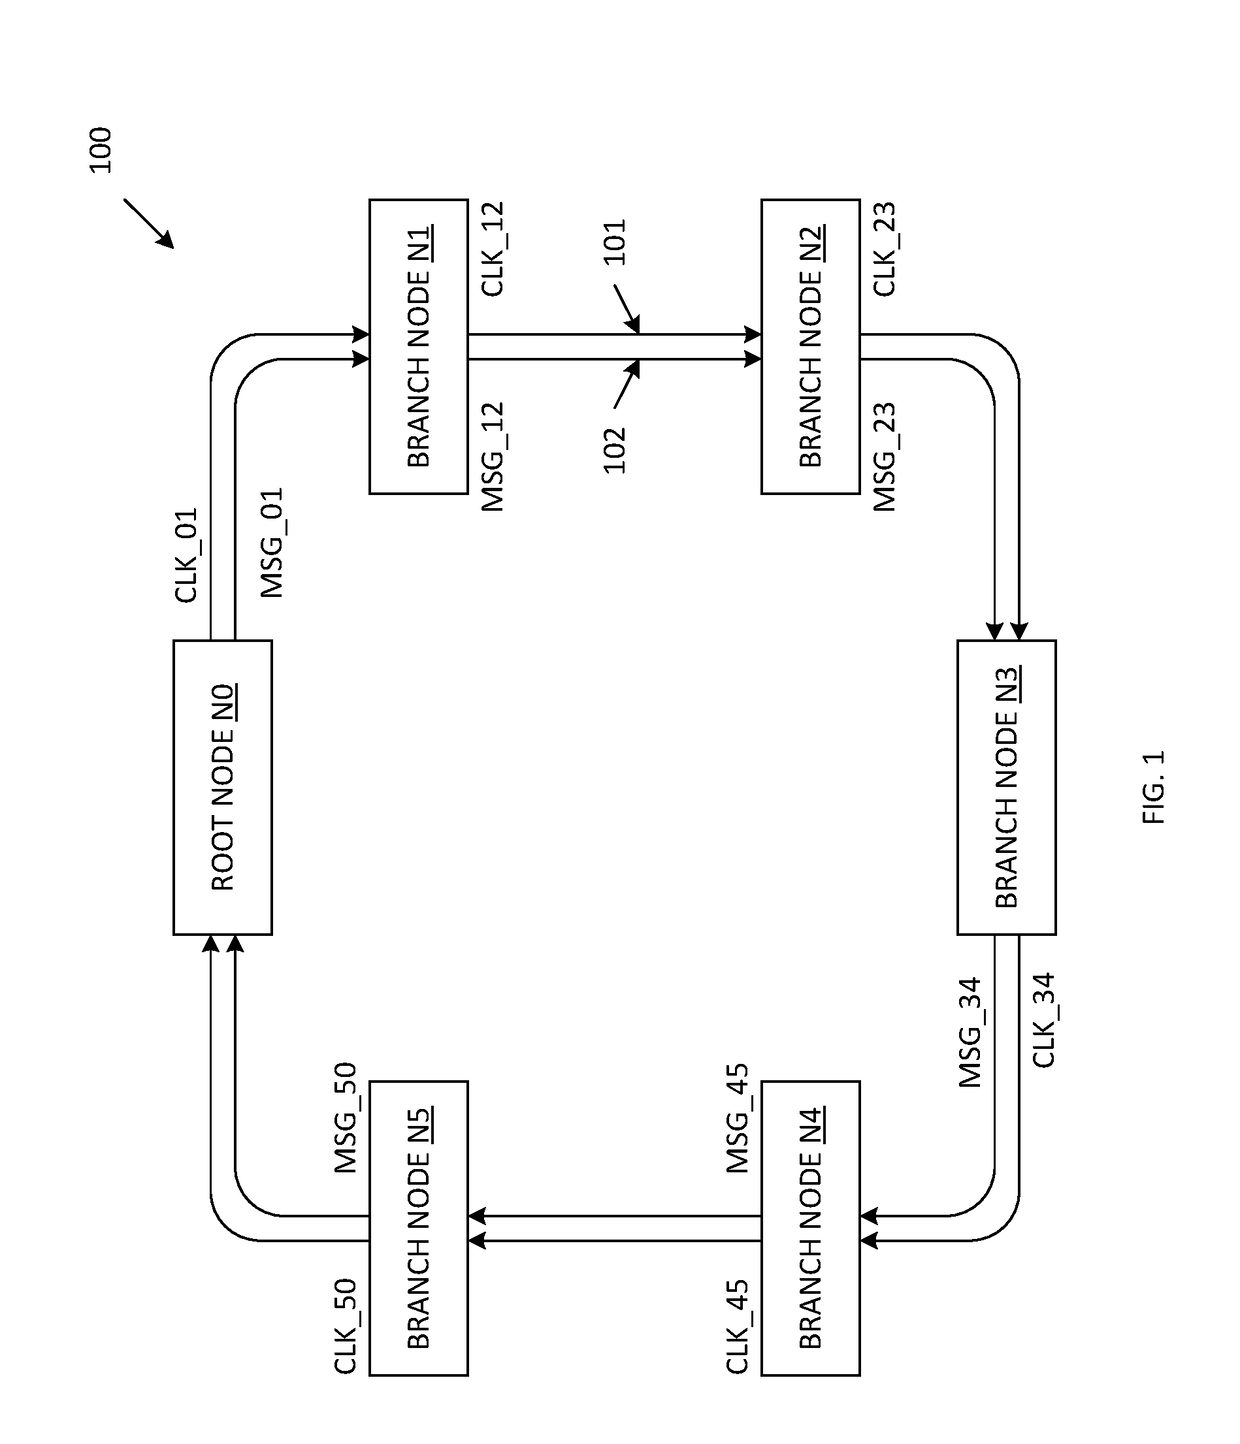 Distributed Control Synchronized Ring Network Architecture